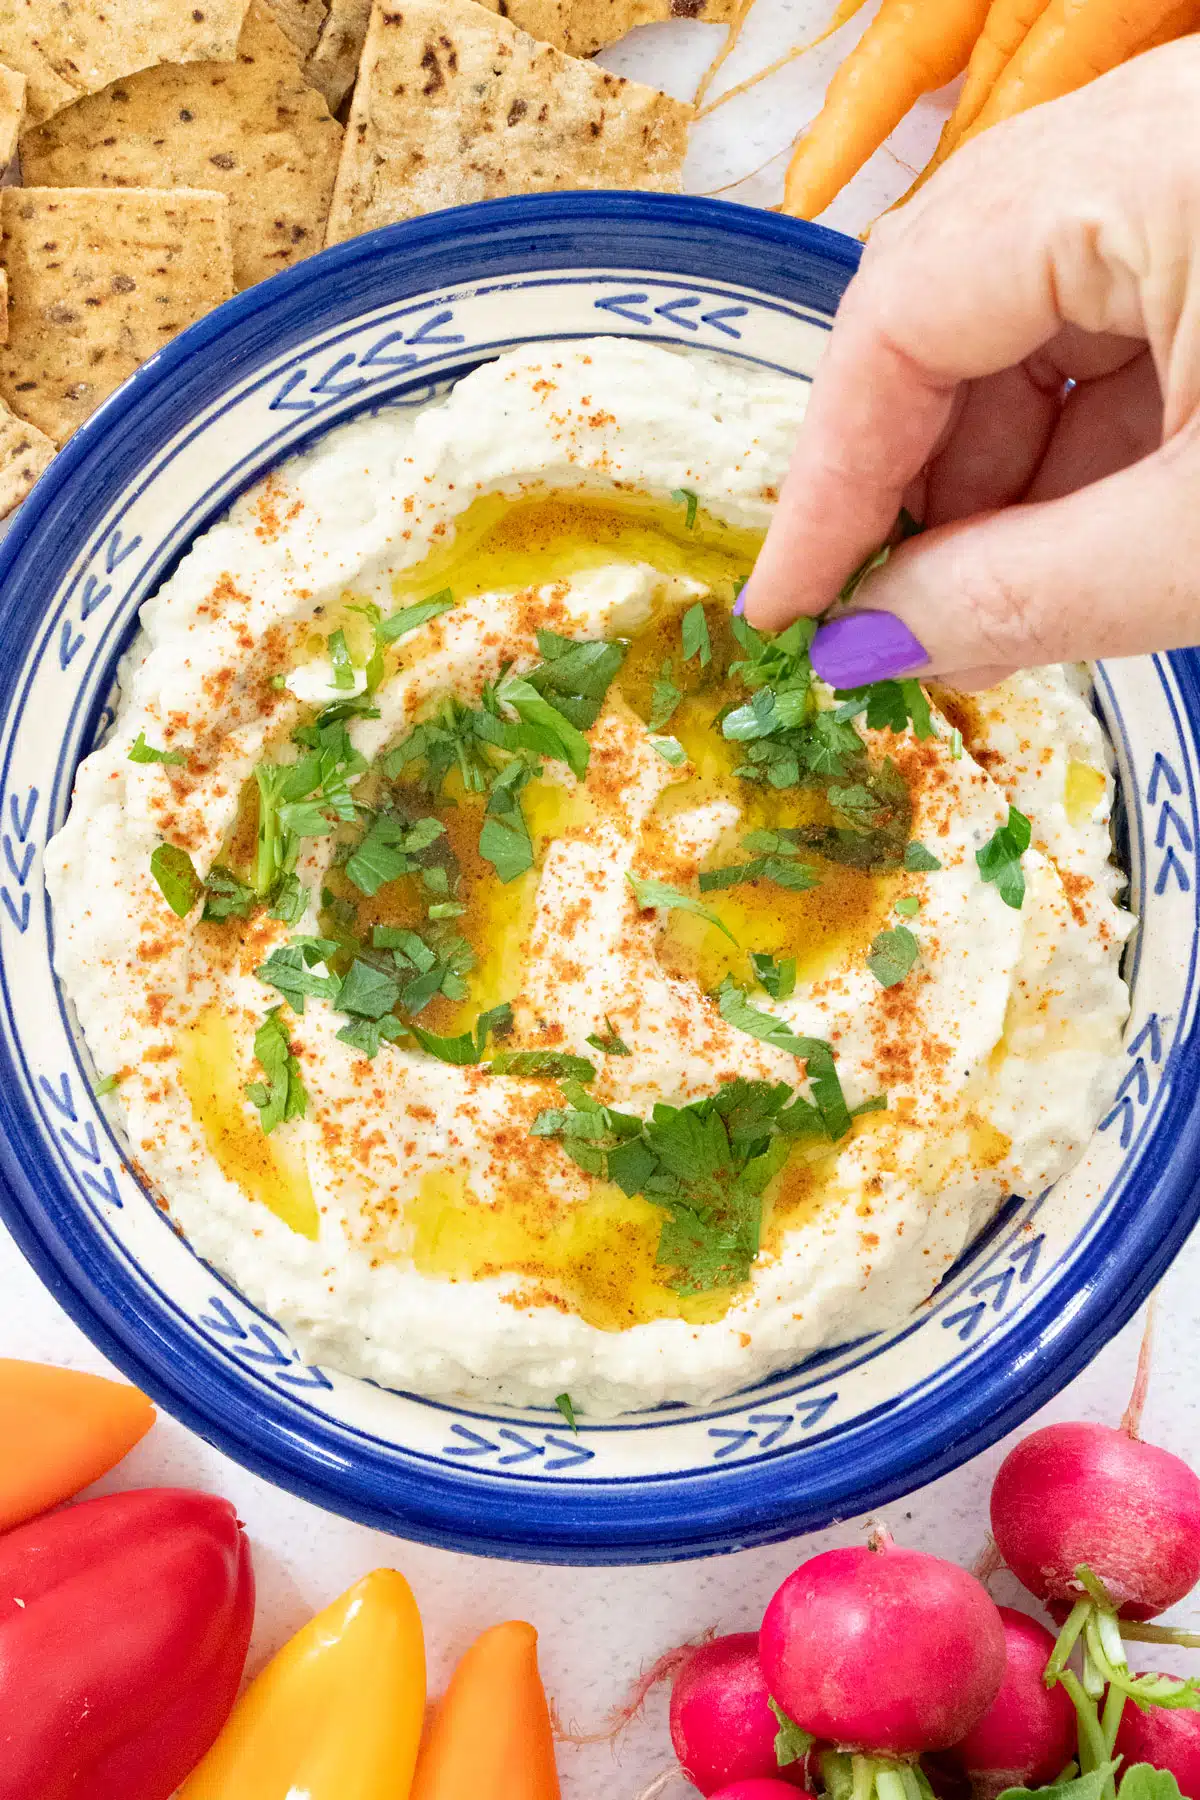 A white hand is sprinkling chopped parsley over a dish of baba ganoush. It's surrounded by vegetables and crackers.